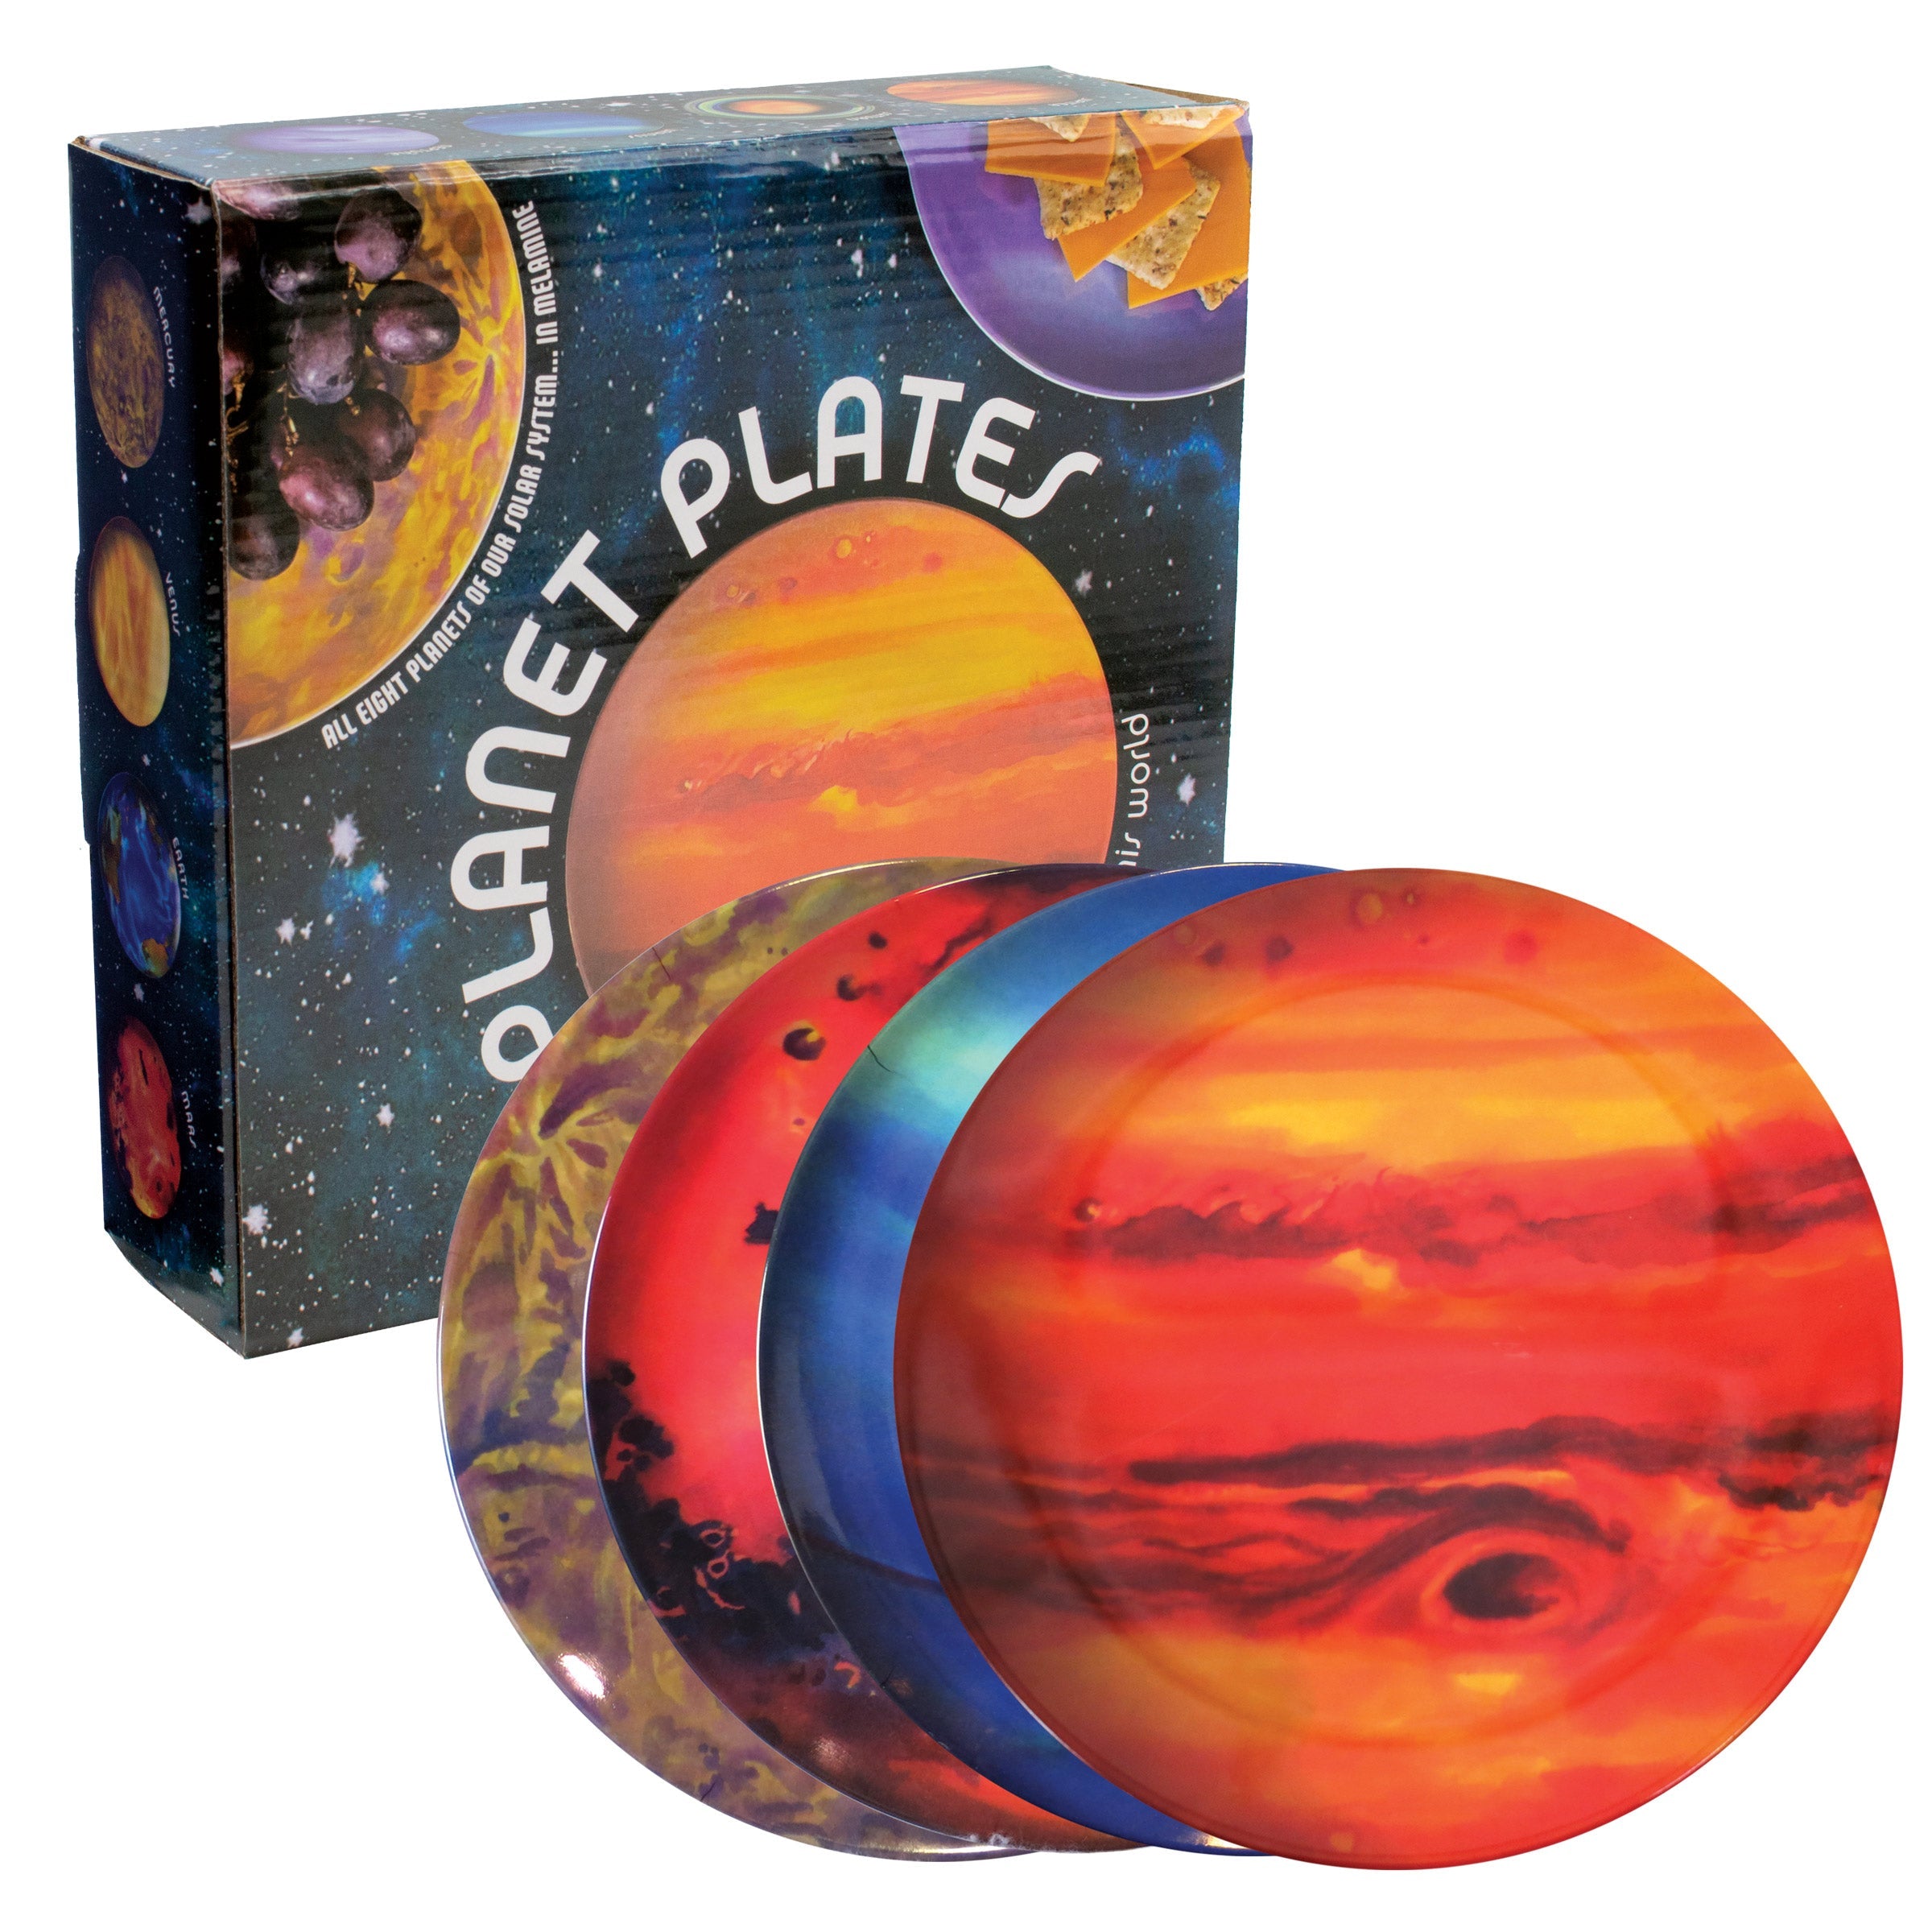 Product photo of Planet Plates, a novelty gift manufactured by The Unemployed Philosophers Guild.